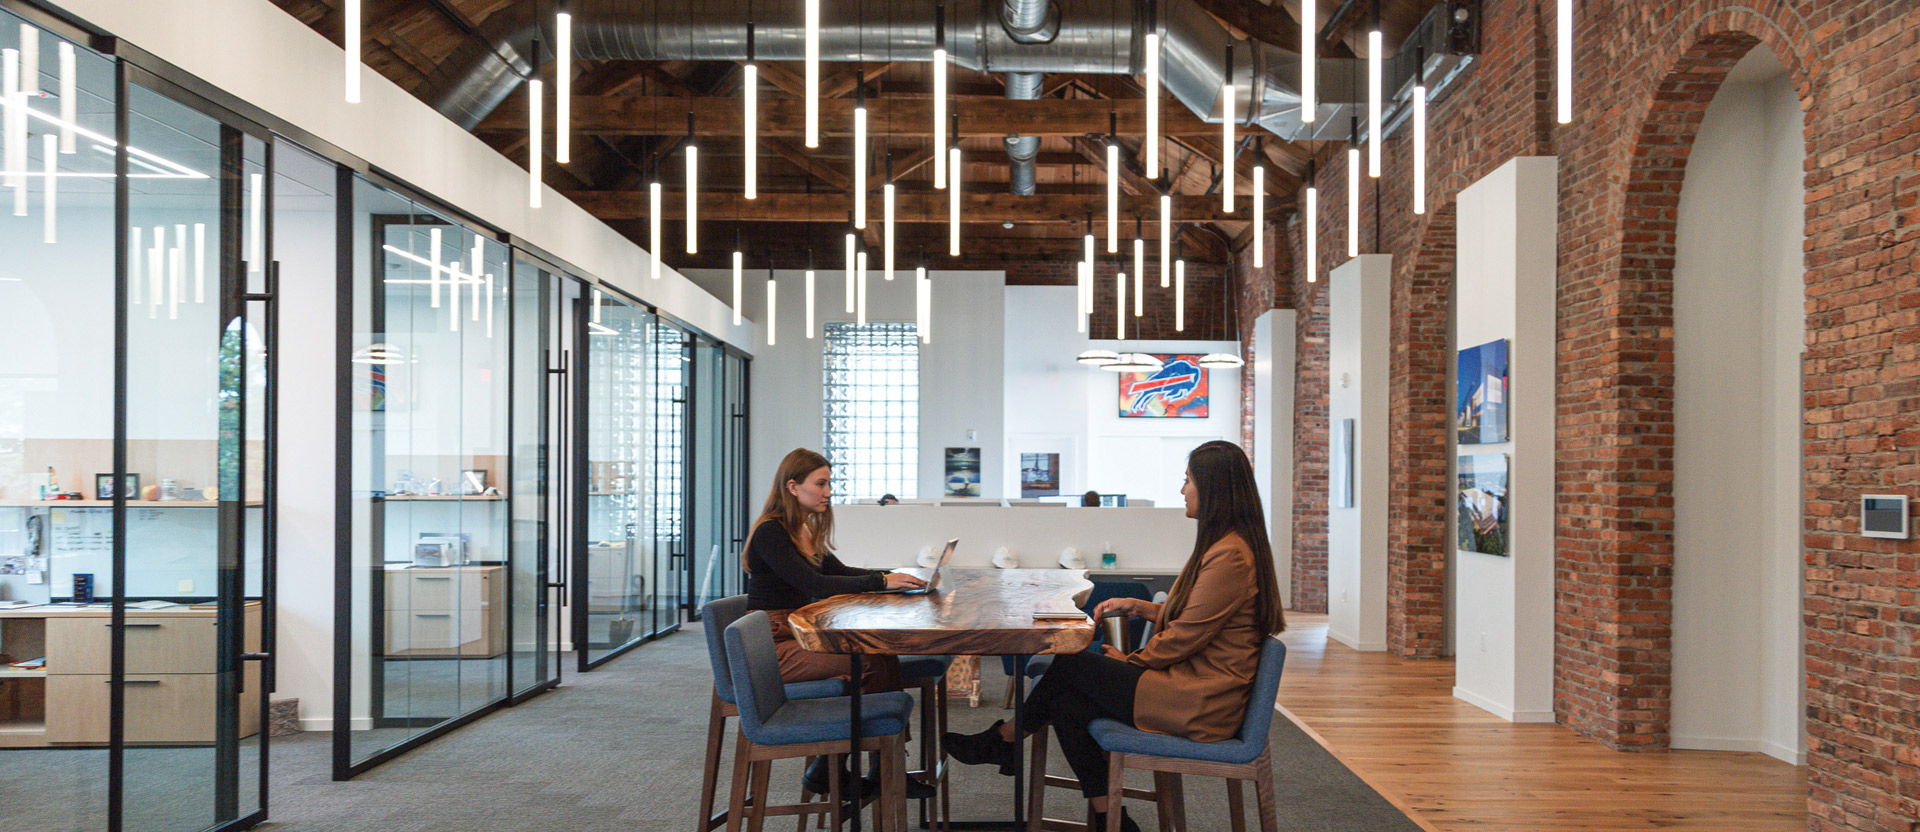 Two professionals sit at a minimalist wooden table in a spacious office with exposed brick walls, wooden beams, and sleek, elongated pendant lights contributing to a modern industrial aesthetic.